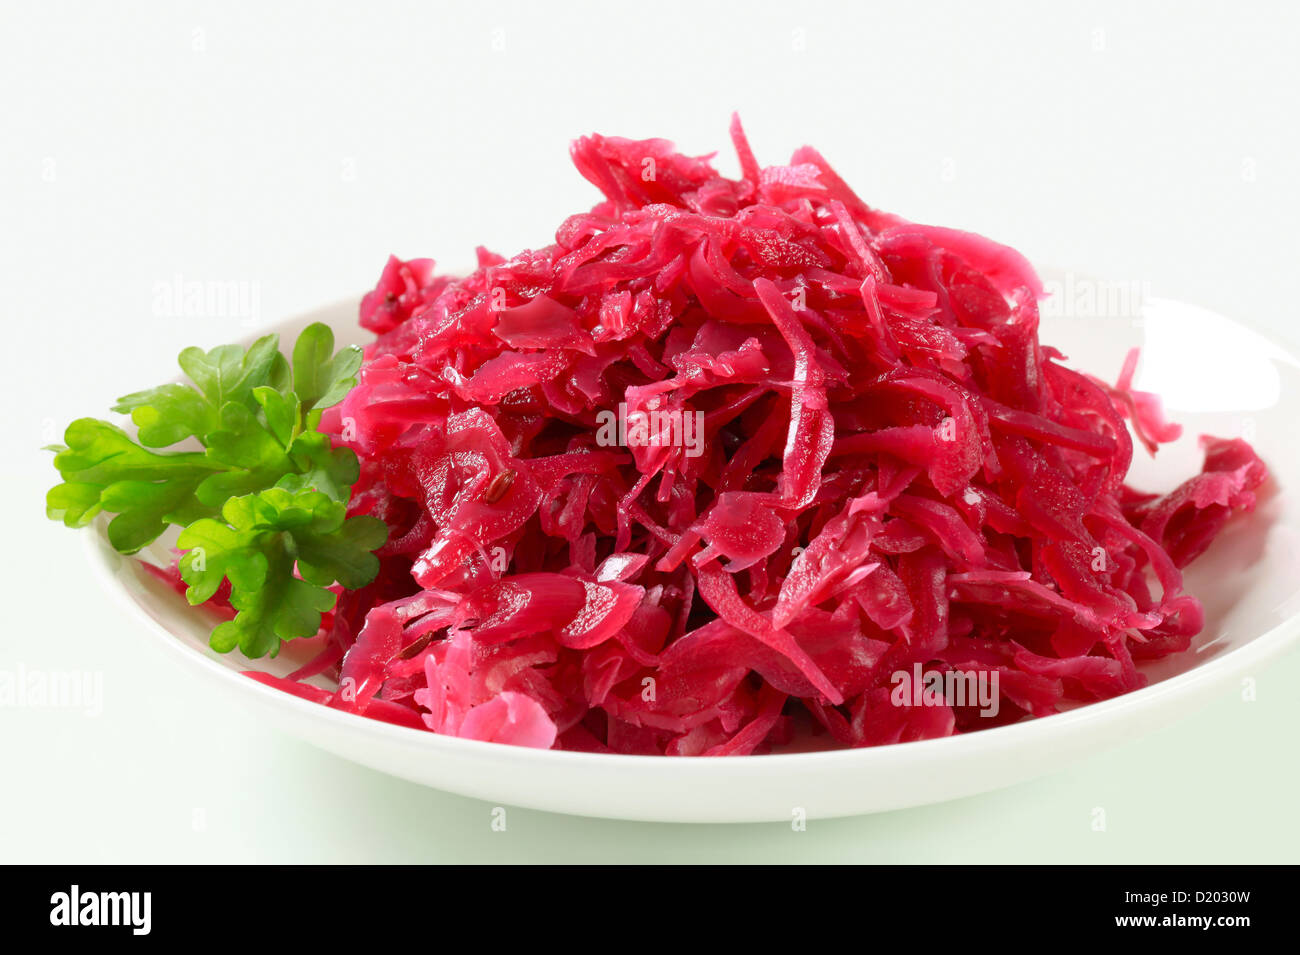 Serving of red kraut on plate Stock Photo